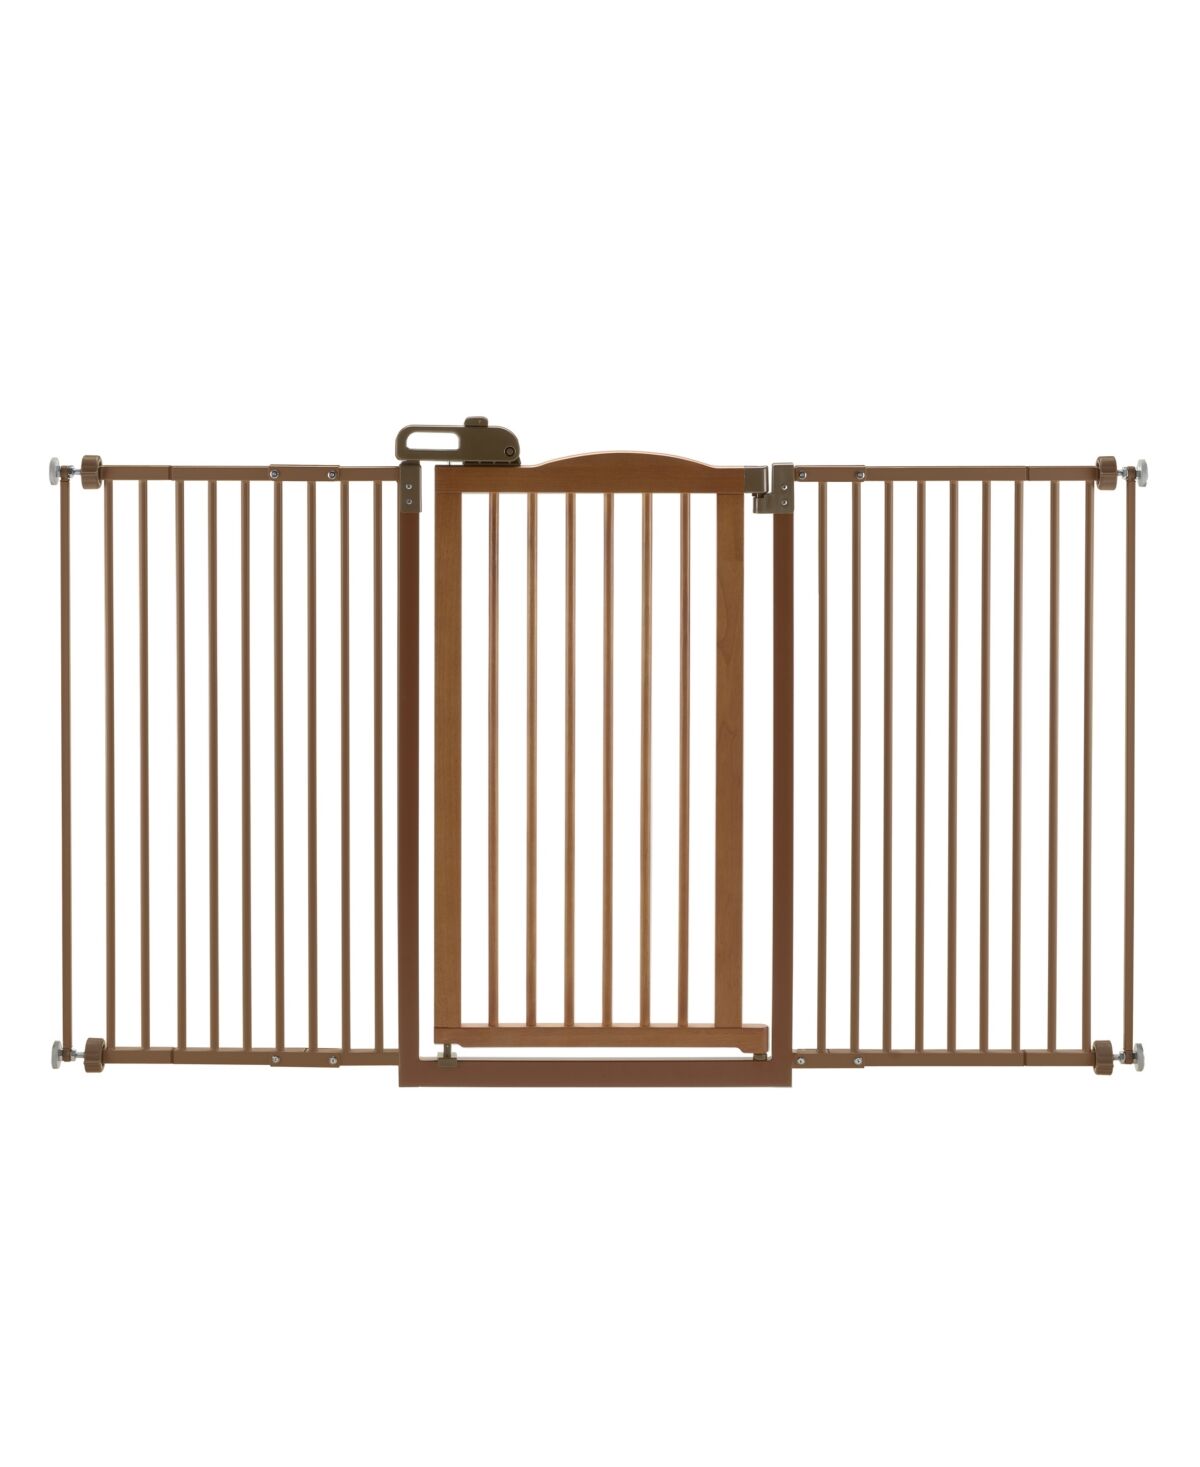 Richell Tall One-Touch Gate Ii Wide - Brown